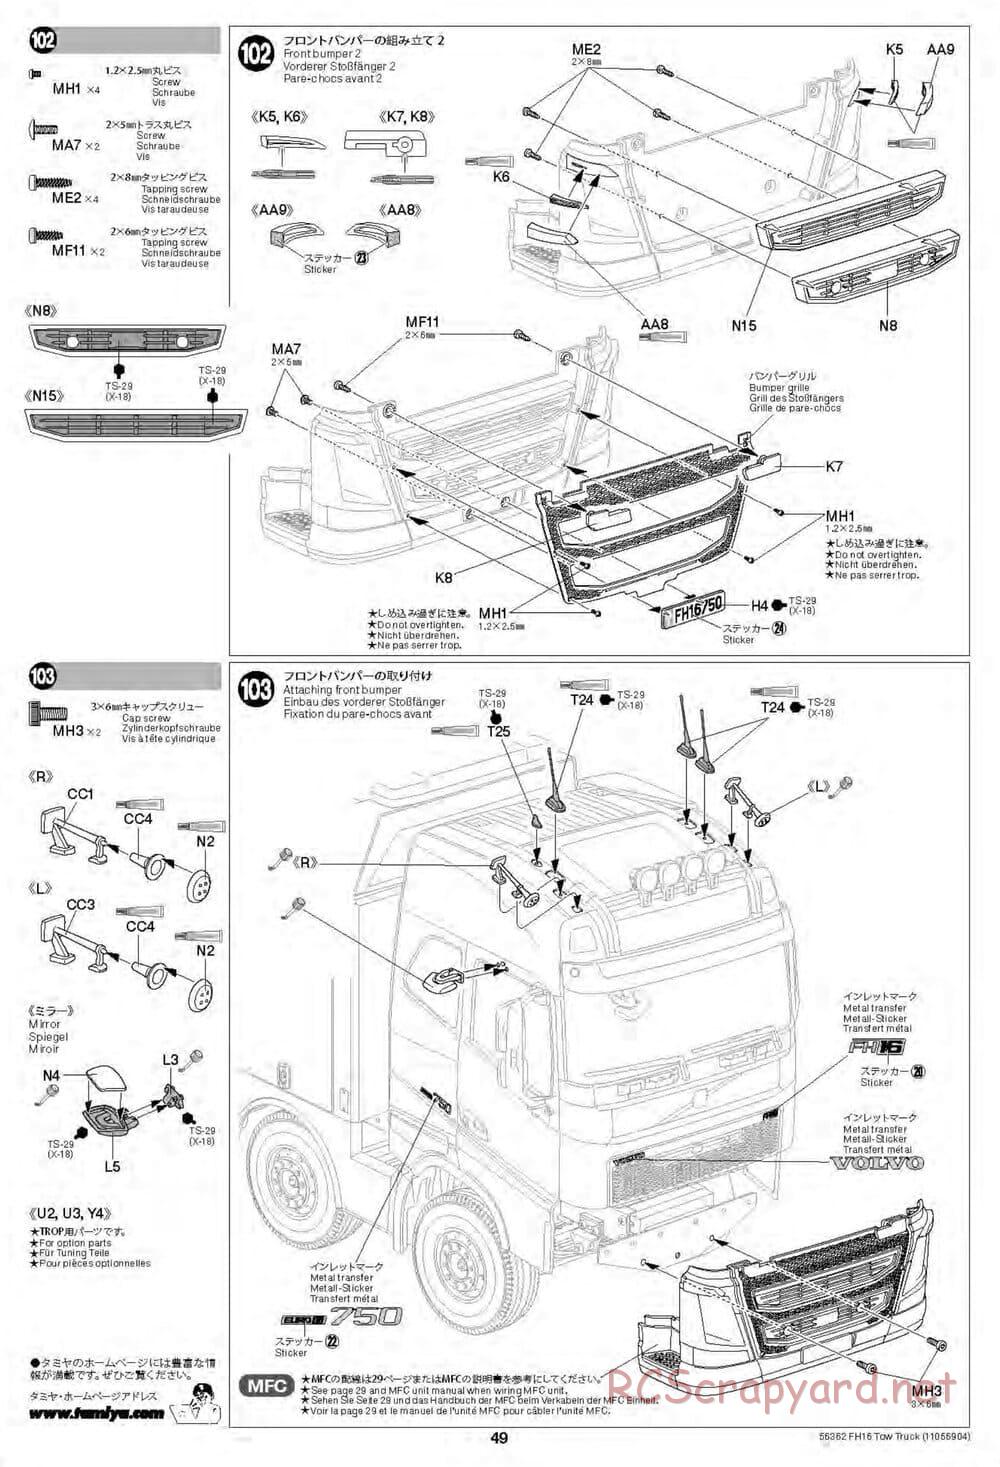 Tamiya - Volvo FH16 Globetrotter 750 8x4 Tow Truck - Manual - Page 49